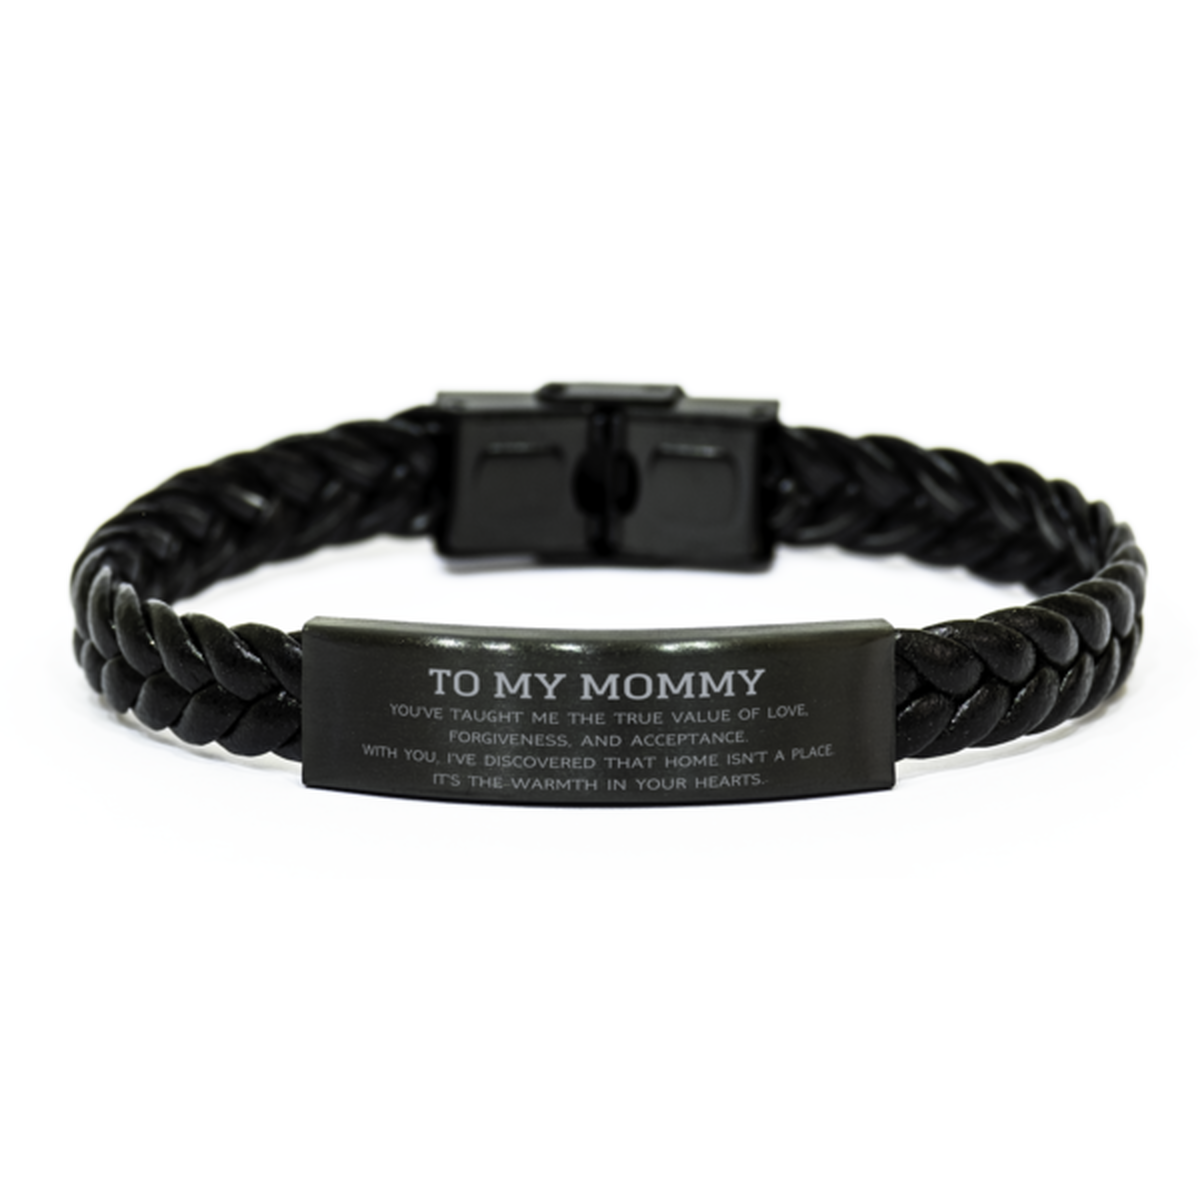 To My Mommy Gifts, You've taught me the true value of love, Thank You Gifts For Mommy, Birthday Braided Leather Bracelet For Mommy